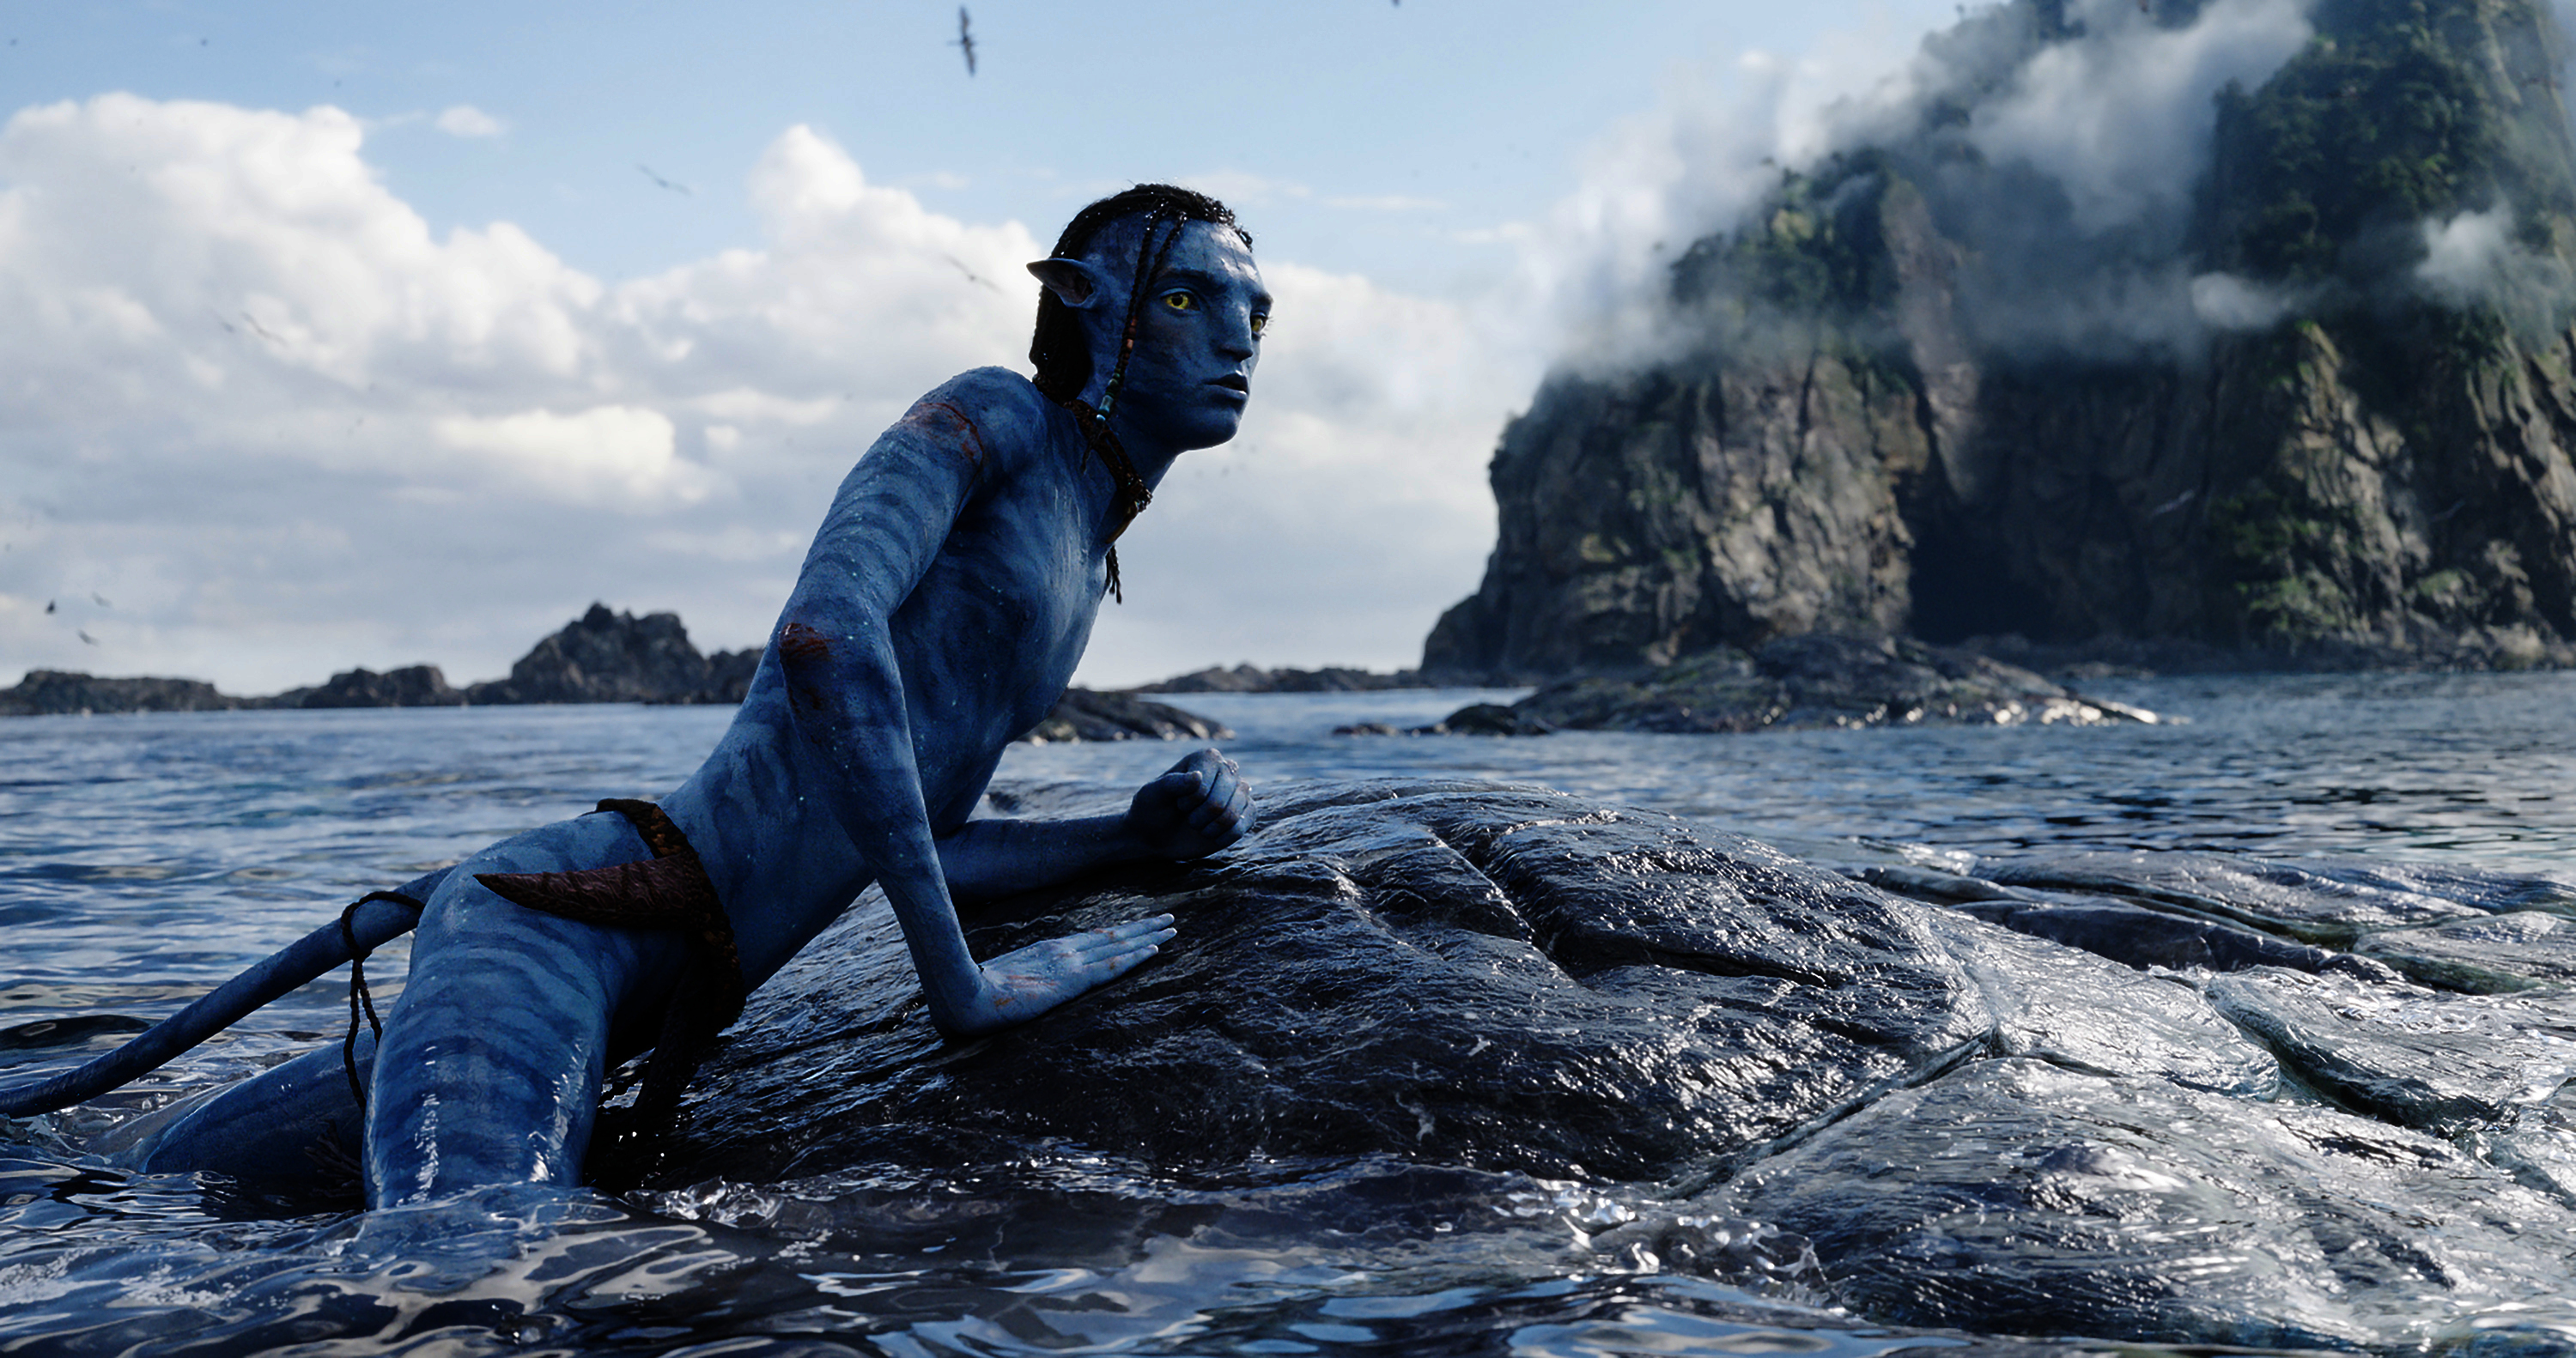 Avatar The Way of Water Slightly Underperforms at the Box Office   MickeyBlogcom